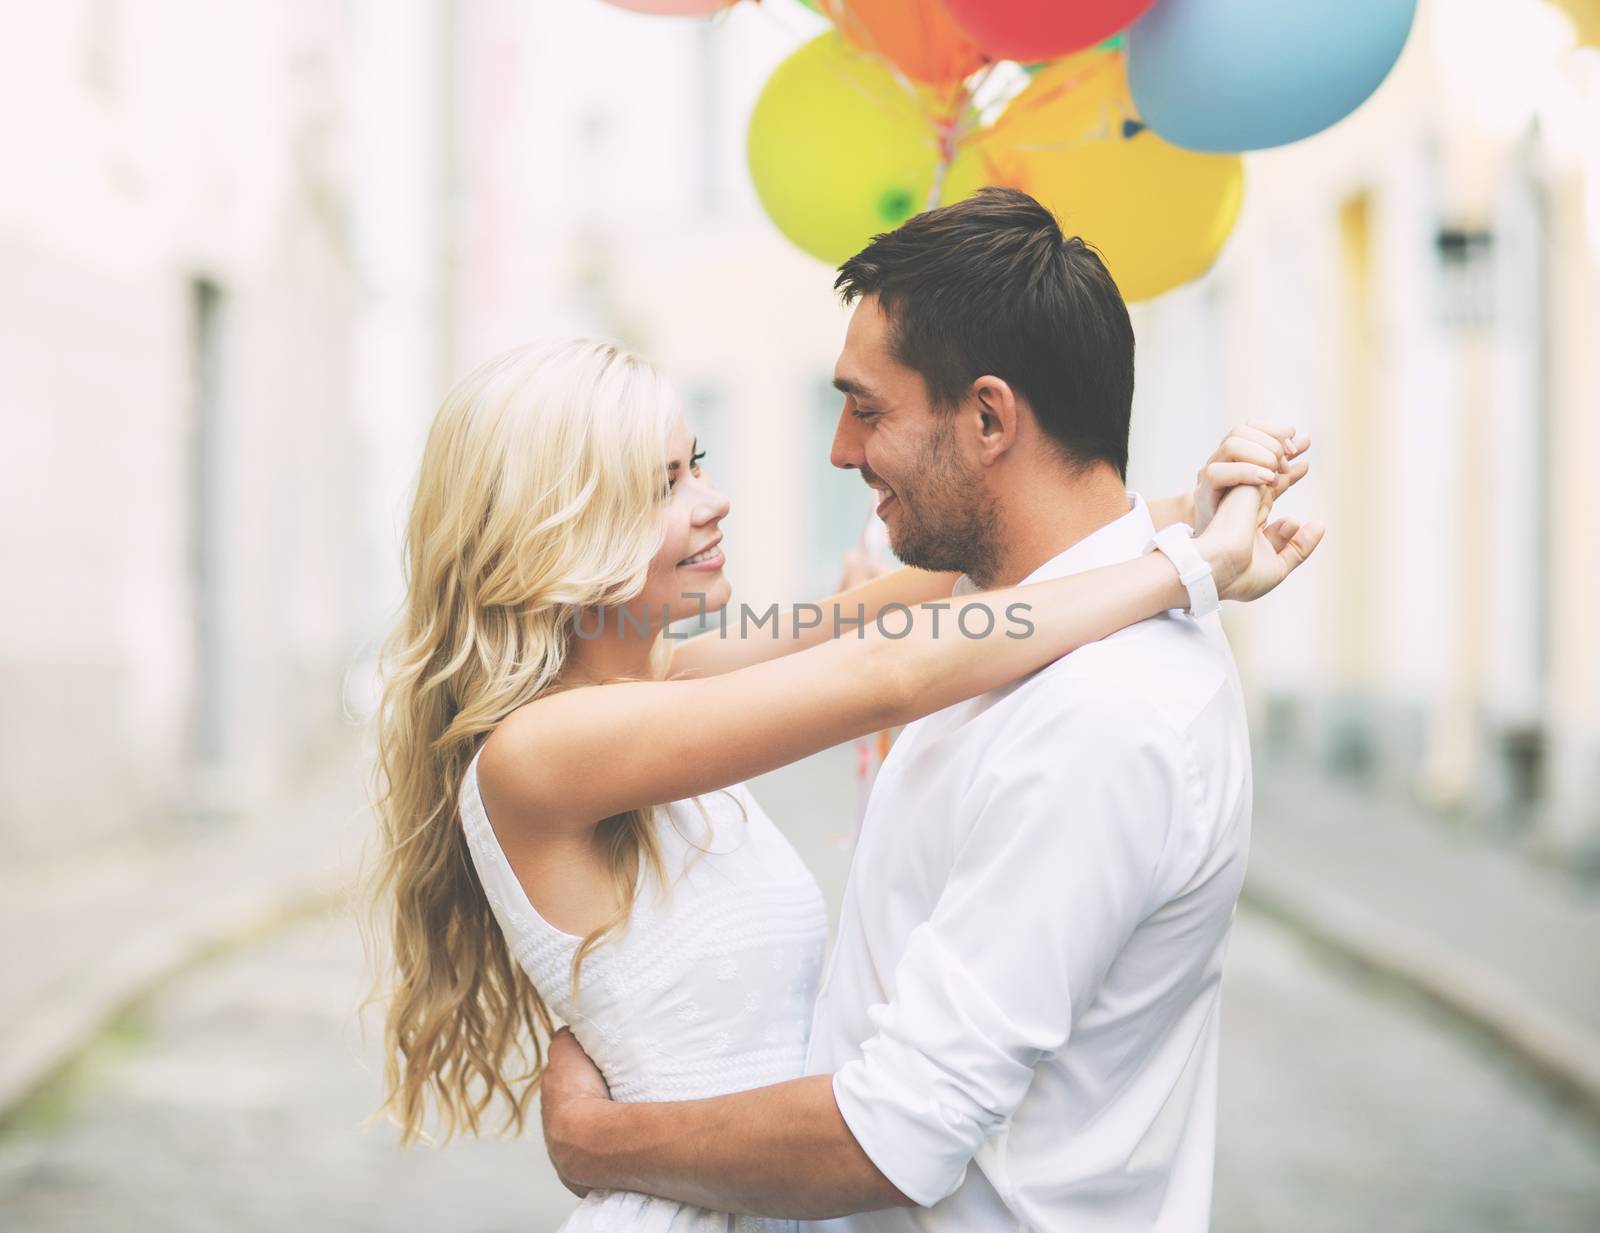 couple with colorful balloons by dolgachov